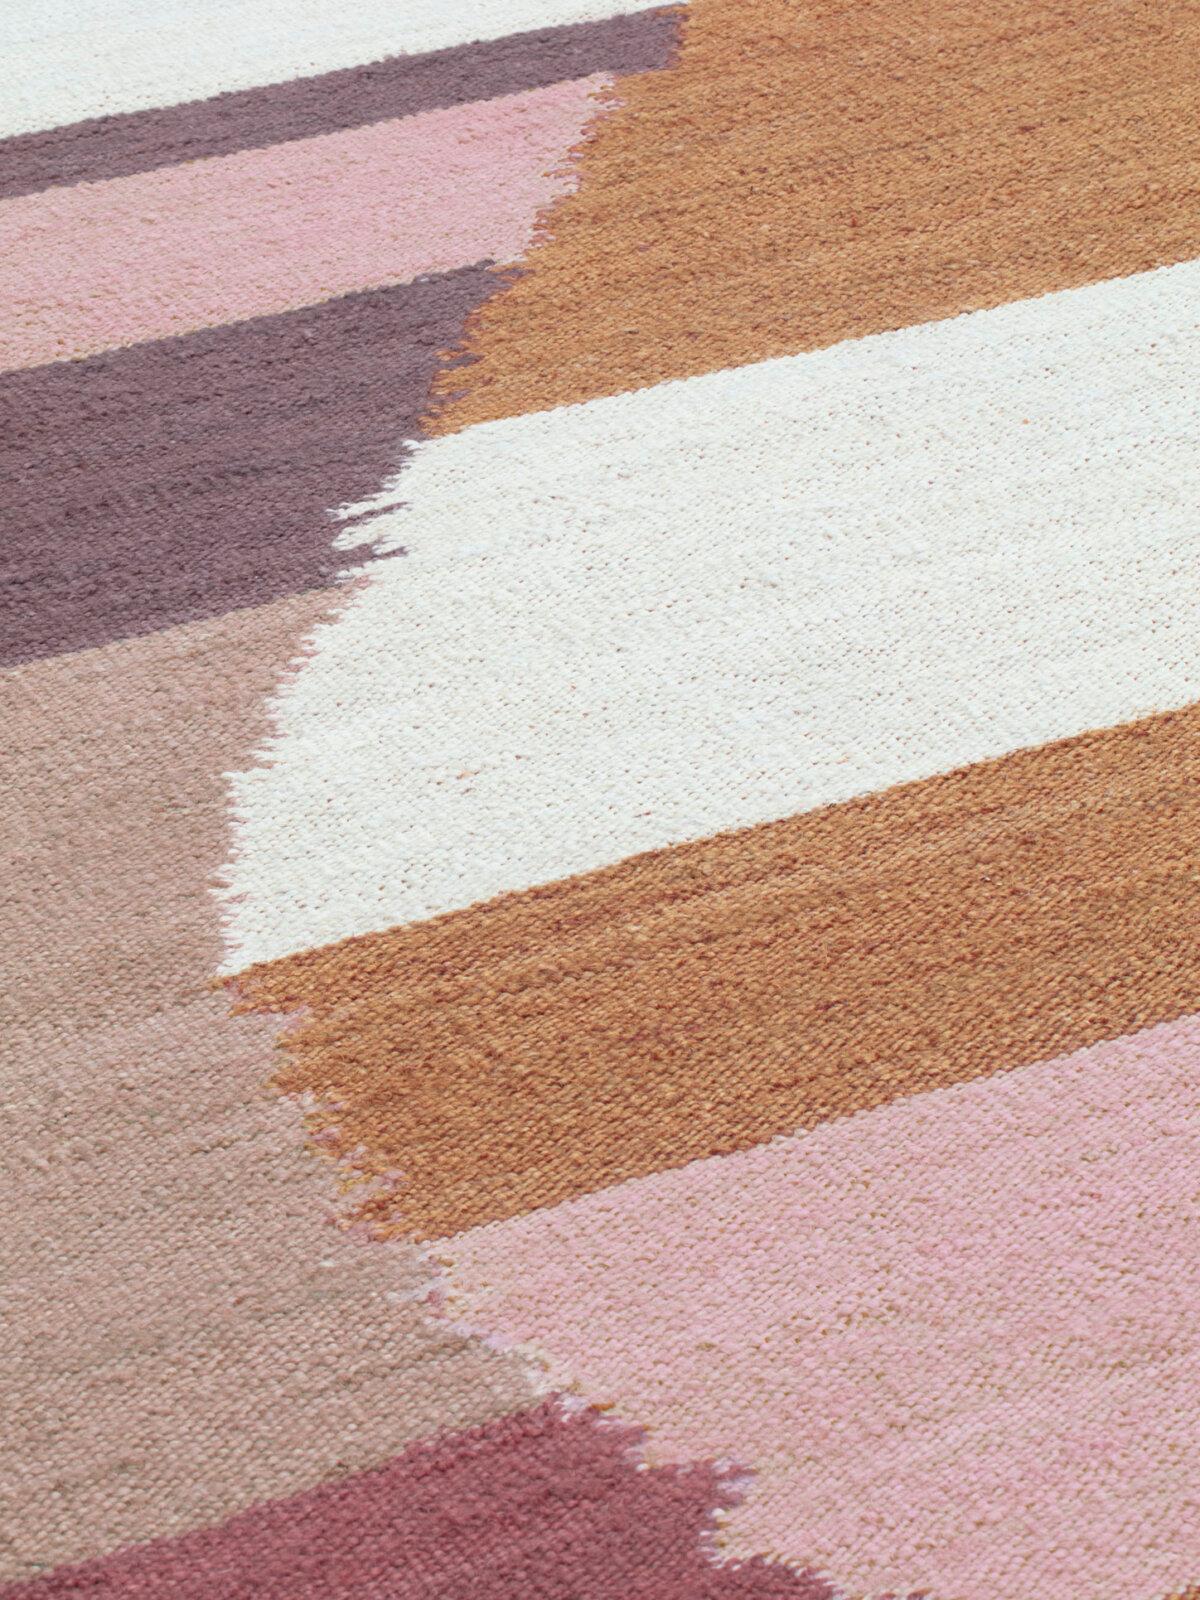 Onda Onda is a collection of rugs designed by designer Charles-Antoine Chappuis for the CC-Tapis brand. Onda Onda rugs are made from jute through the Indian dhurrie technique.

The pattern is reminiscent of the movement of waves, with its flowing,